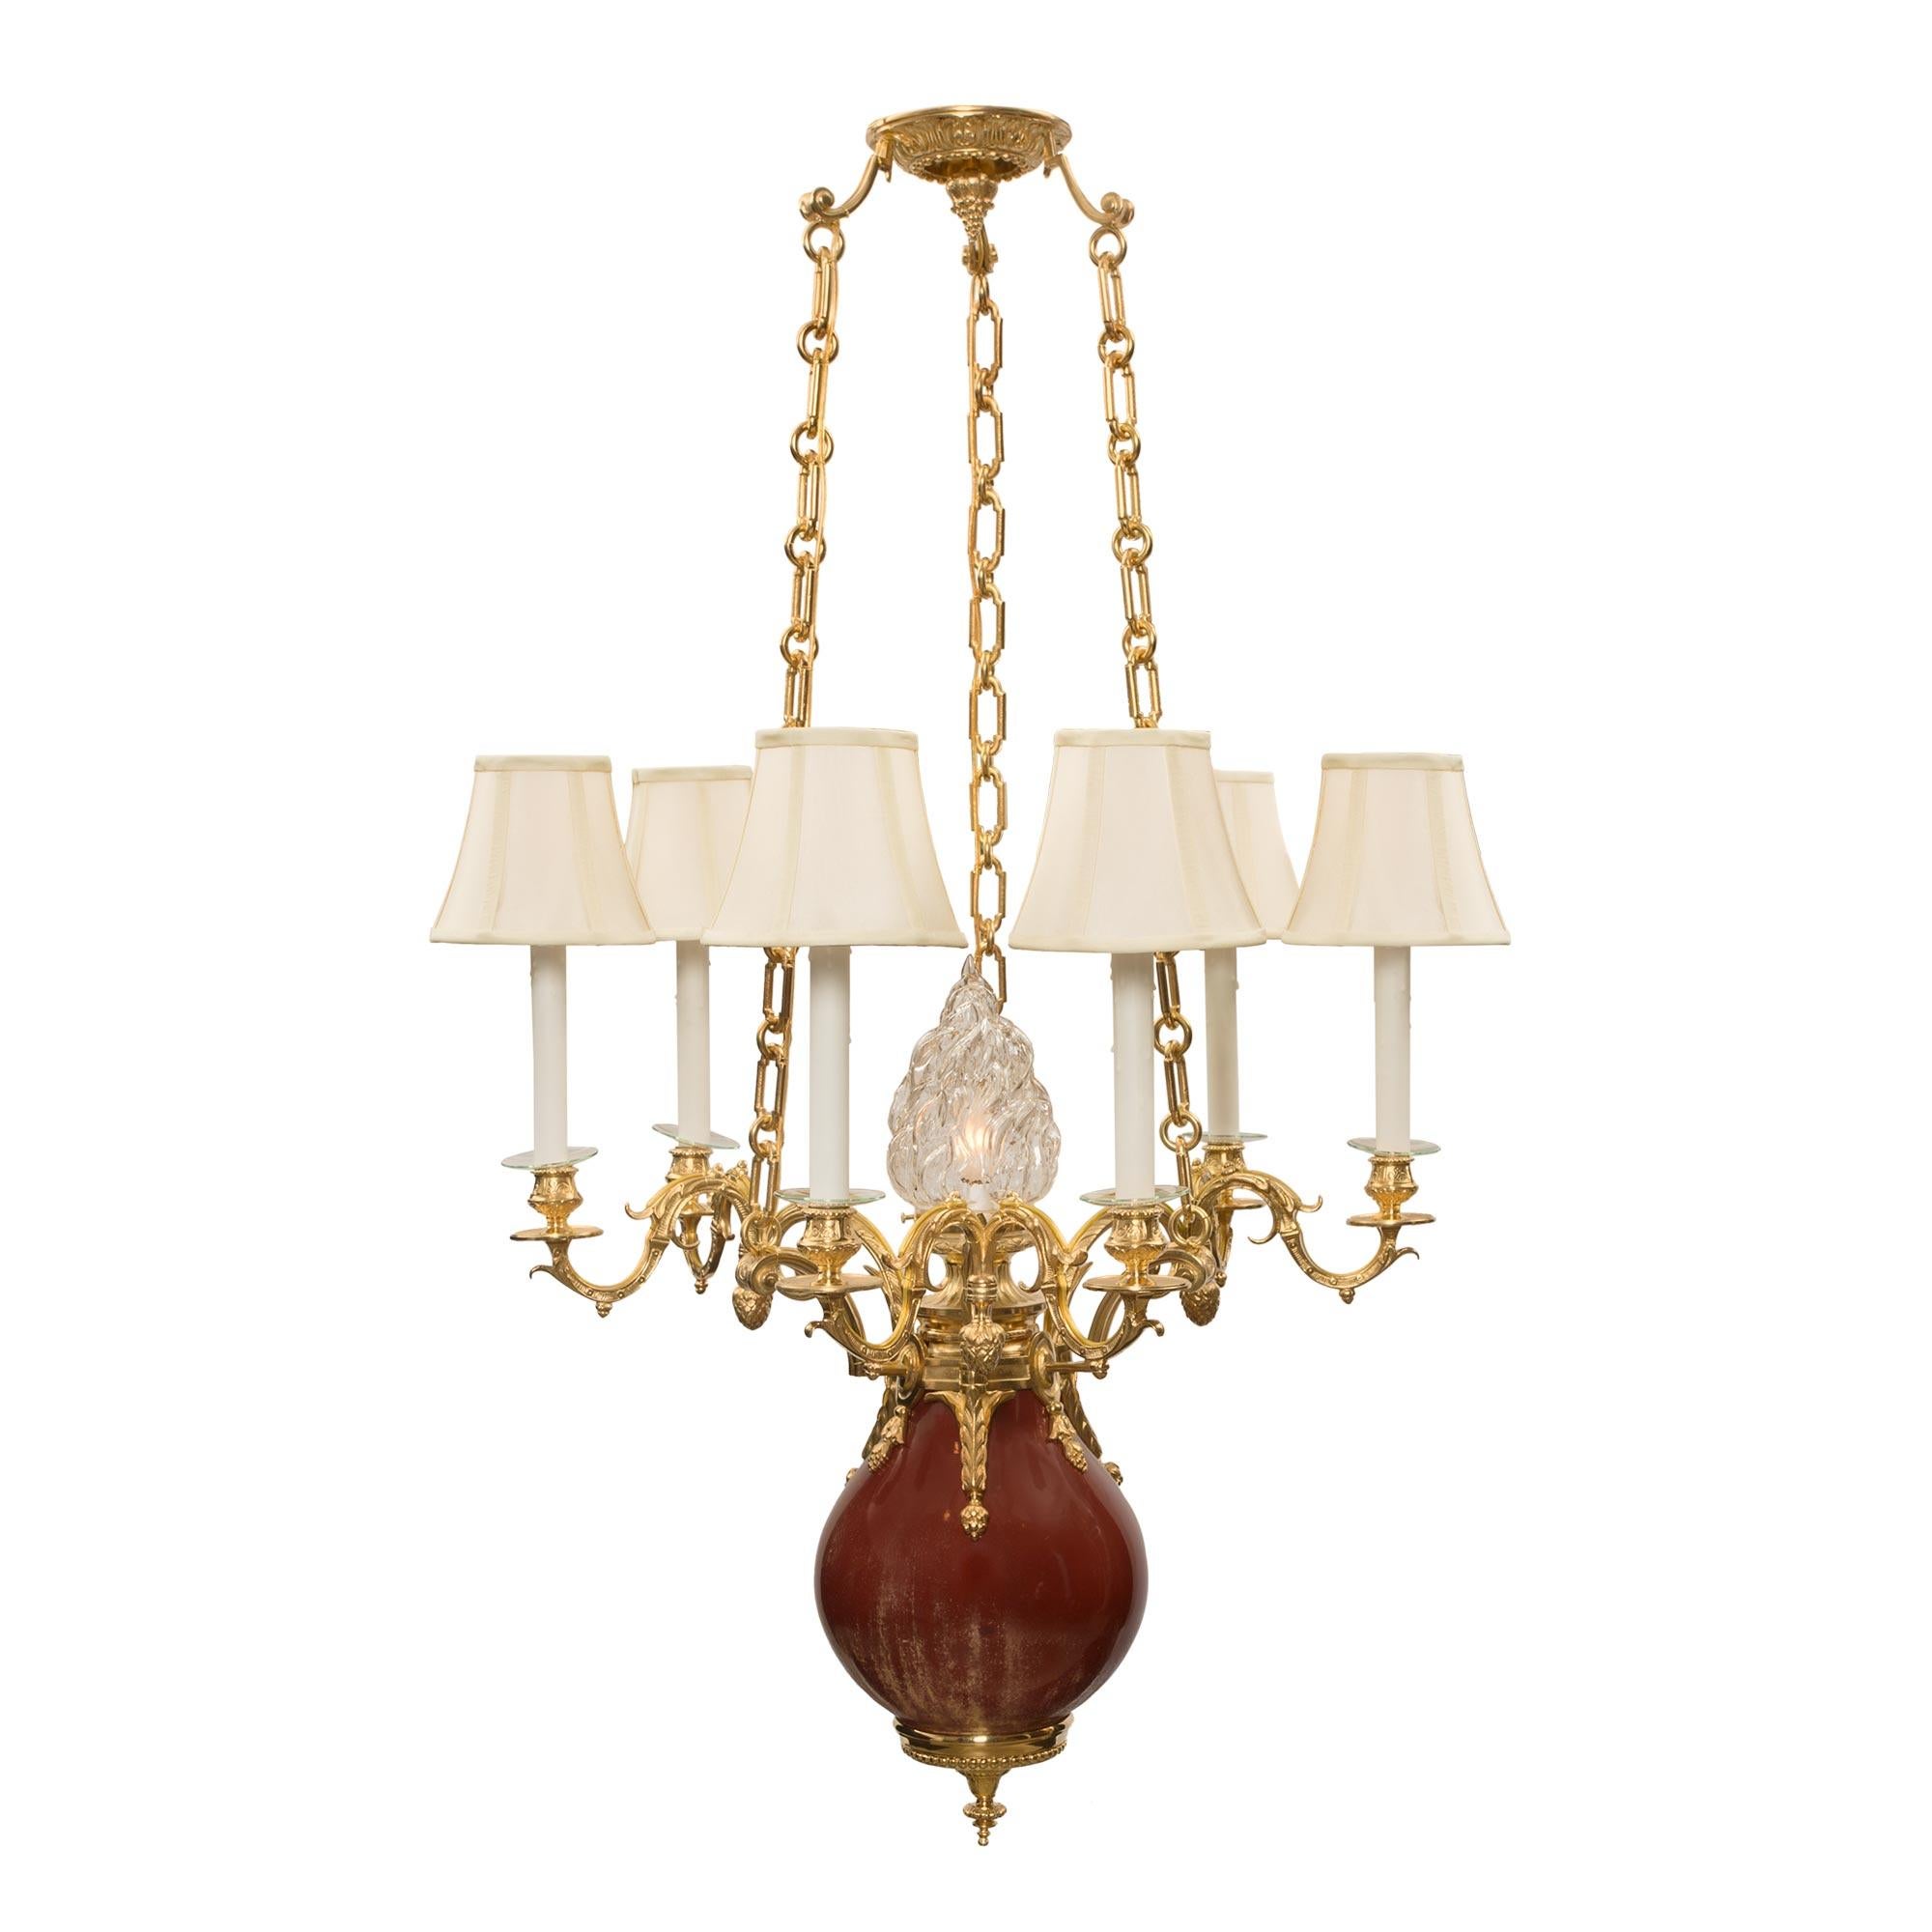 A unique and most decorative French 19th century Louis XVI st. oxblood porcelain and ormolu six arm, seven light chandelier. The chandelier is centered by a fine topie shaped ormolu bottom finial with an elegant beaded wrap around band and lovely